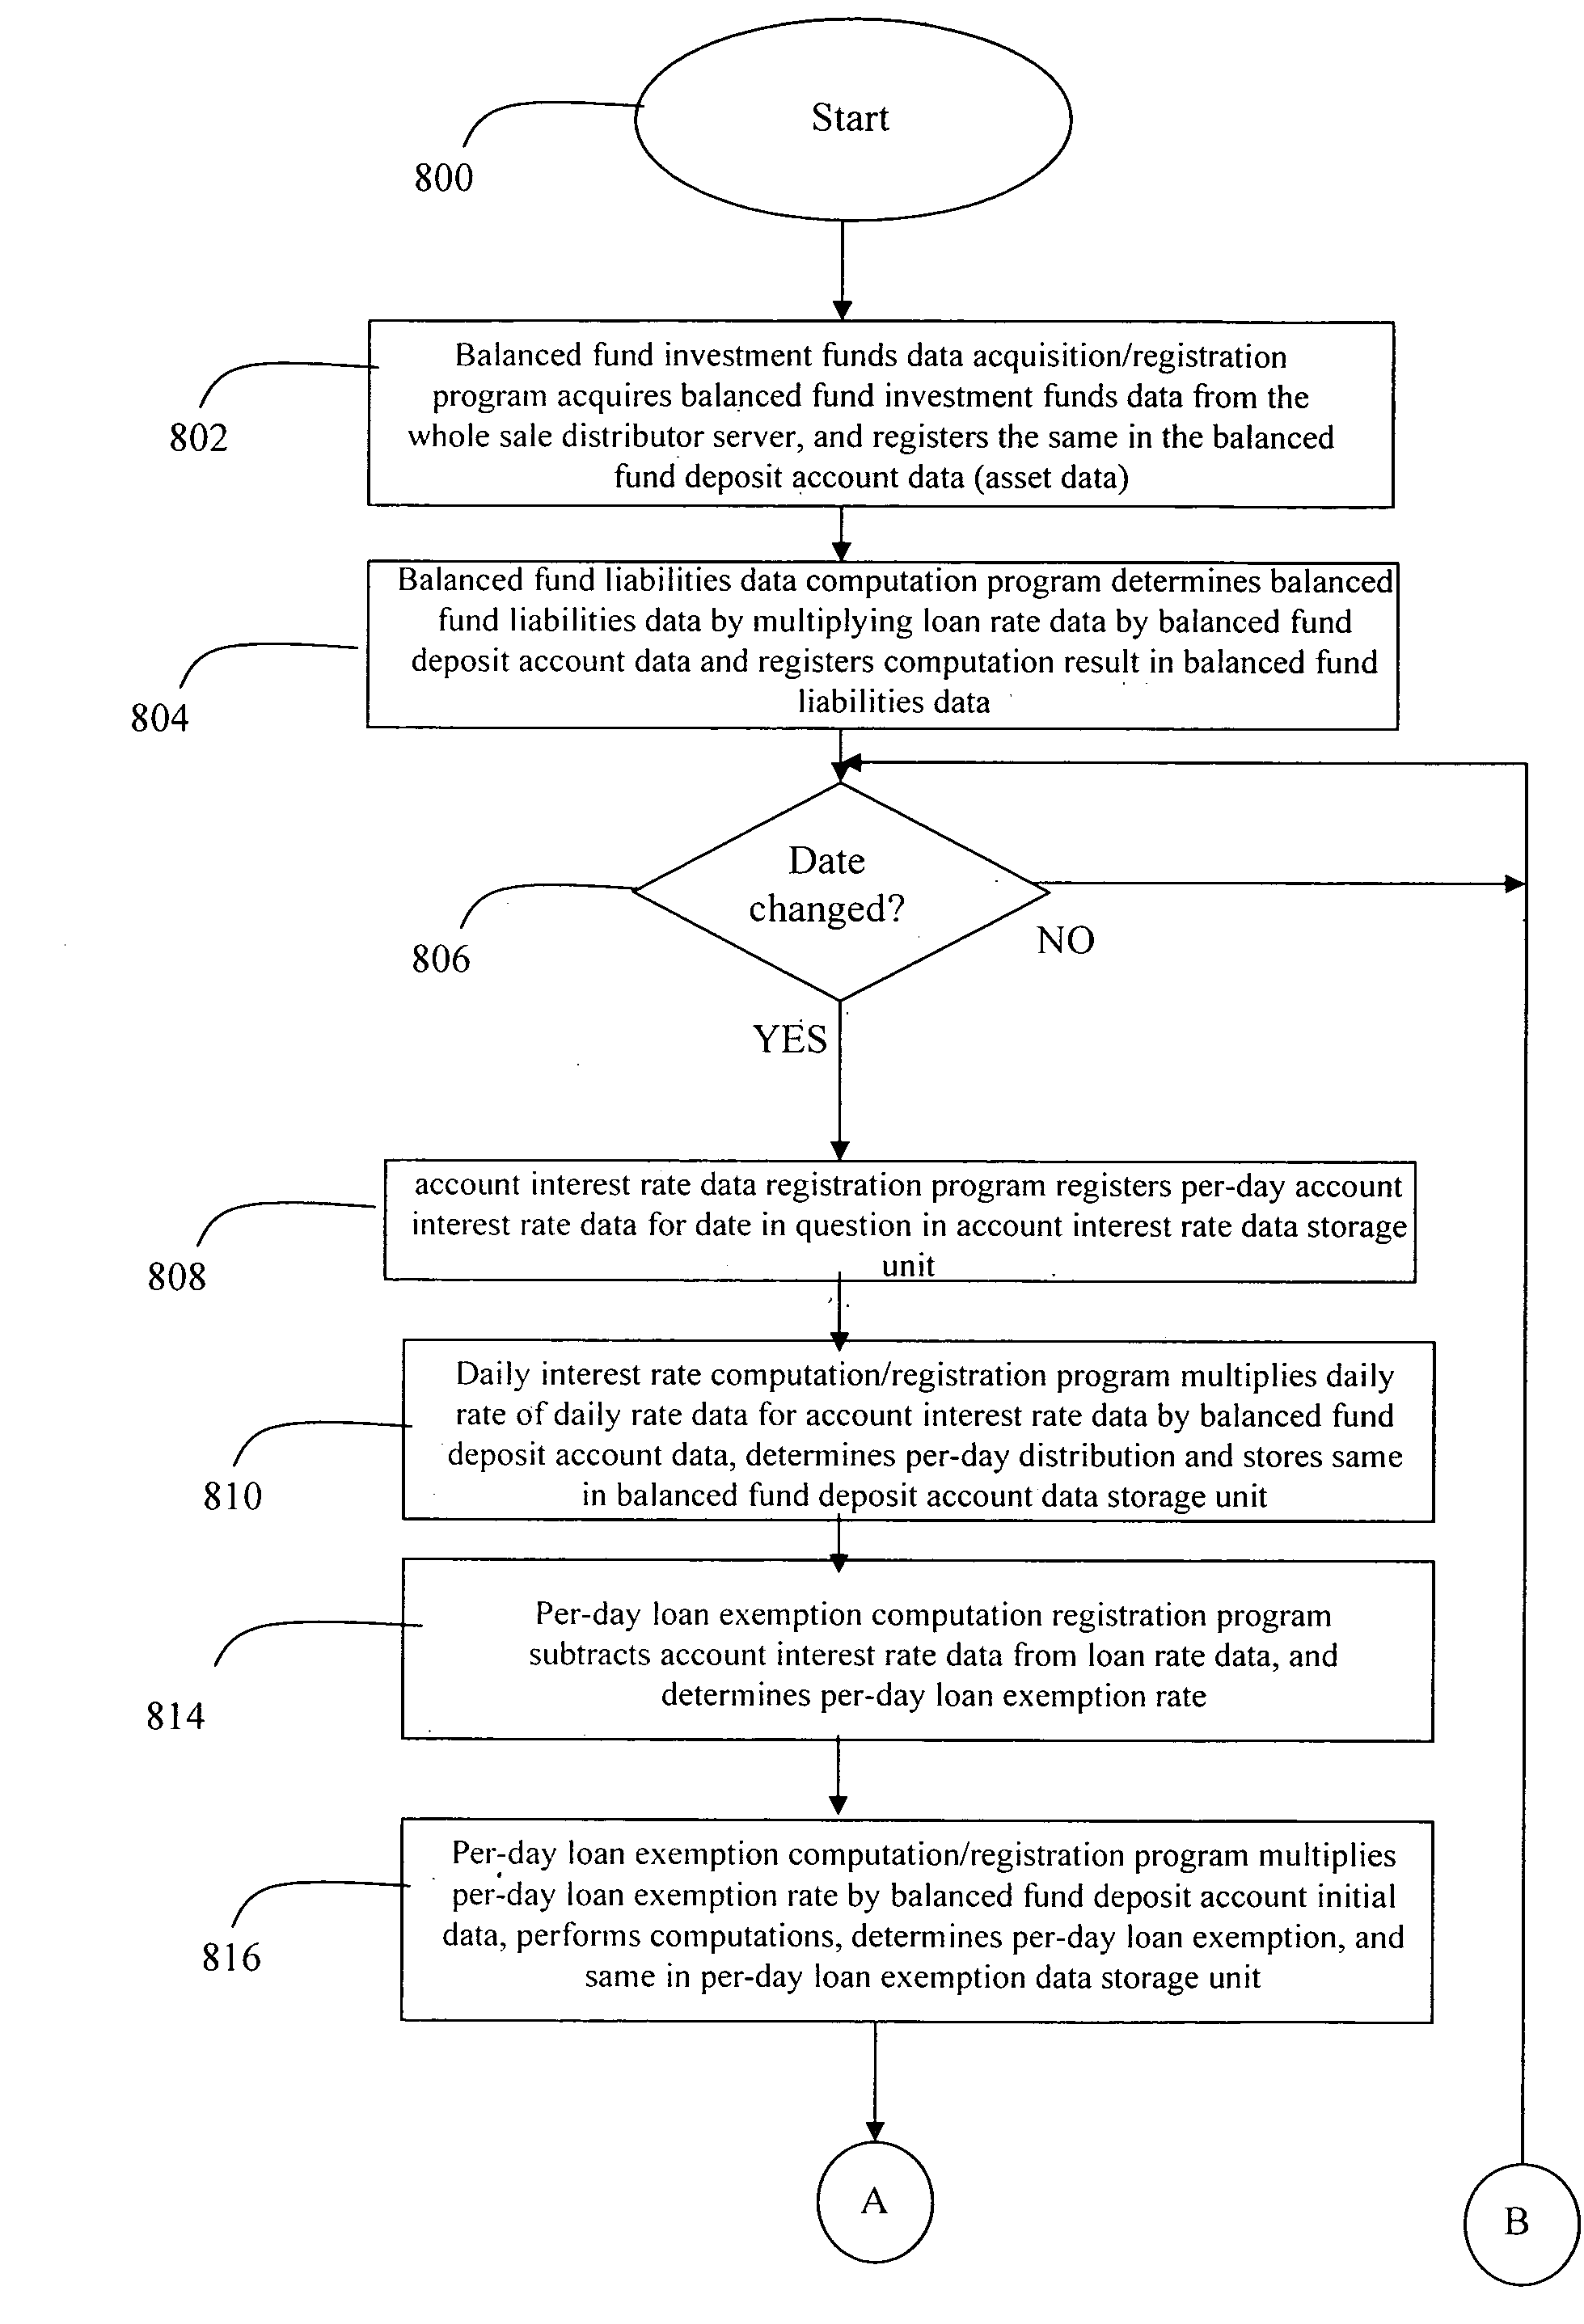 System and method for financial product management